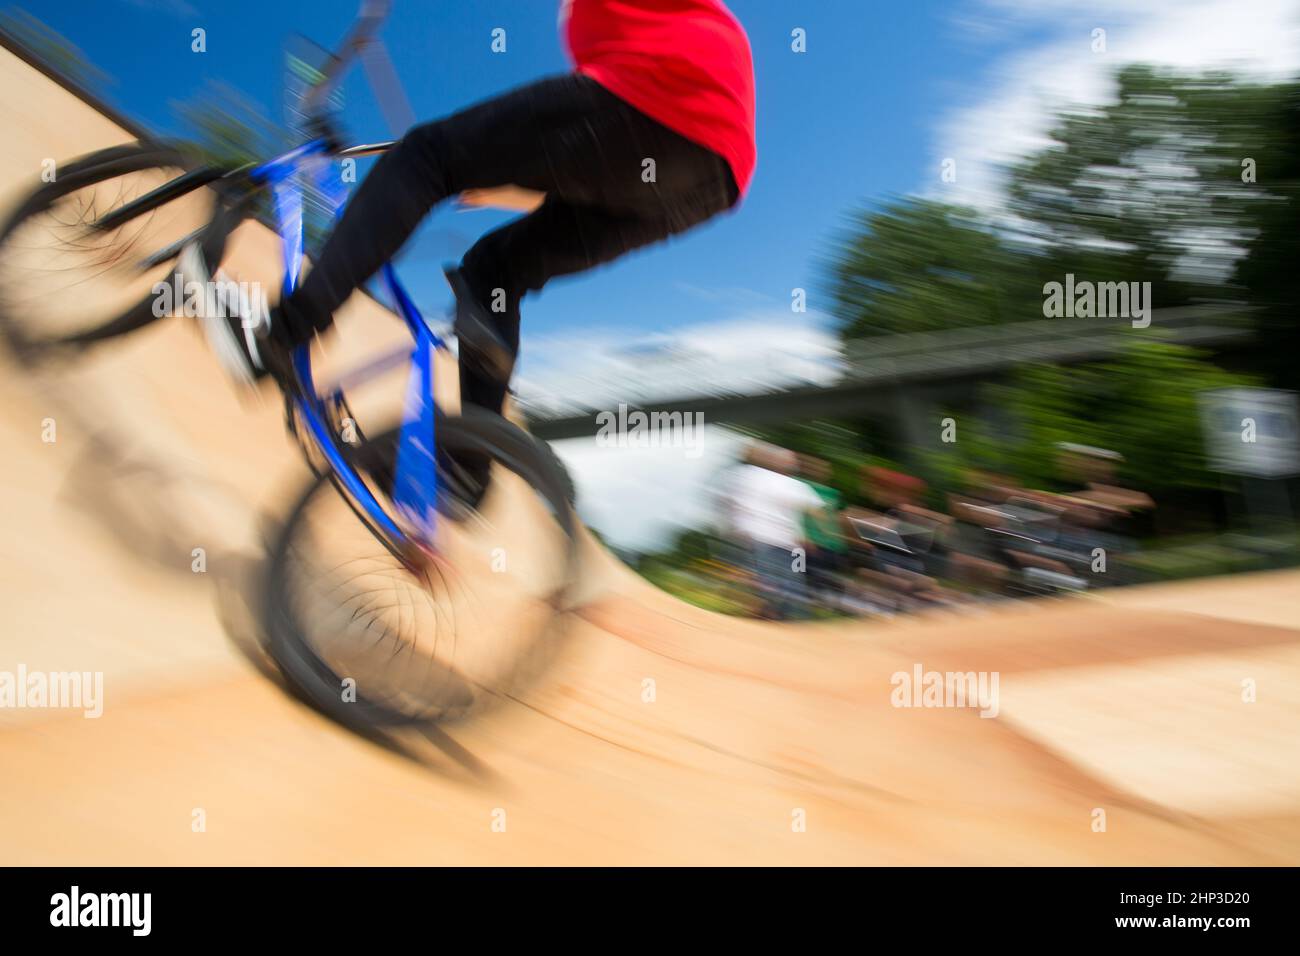 Bmx rider jumping over on a U ramp in a skatepark (motion blurred image) Stock Photo